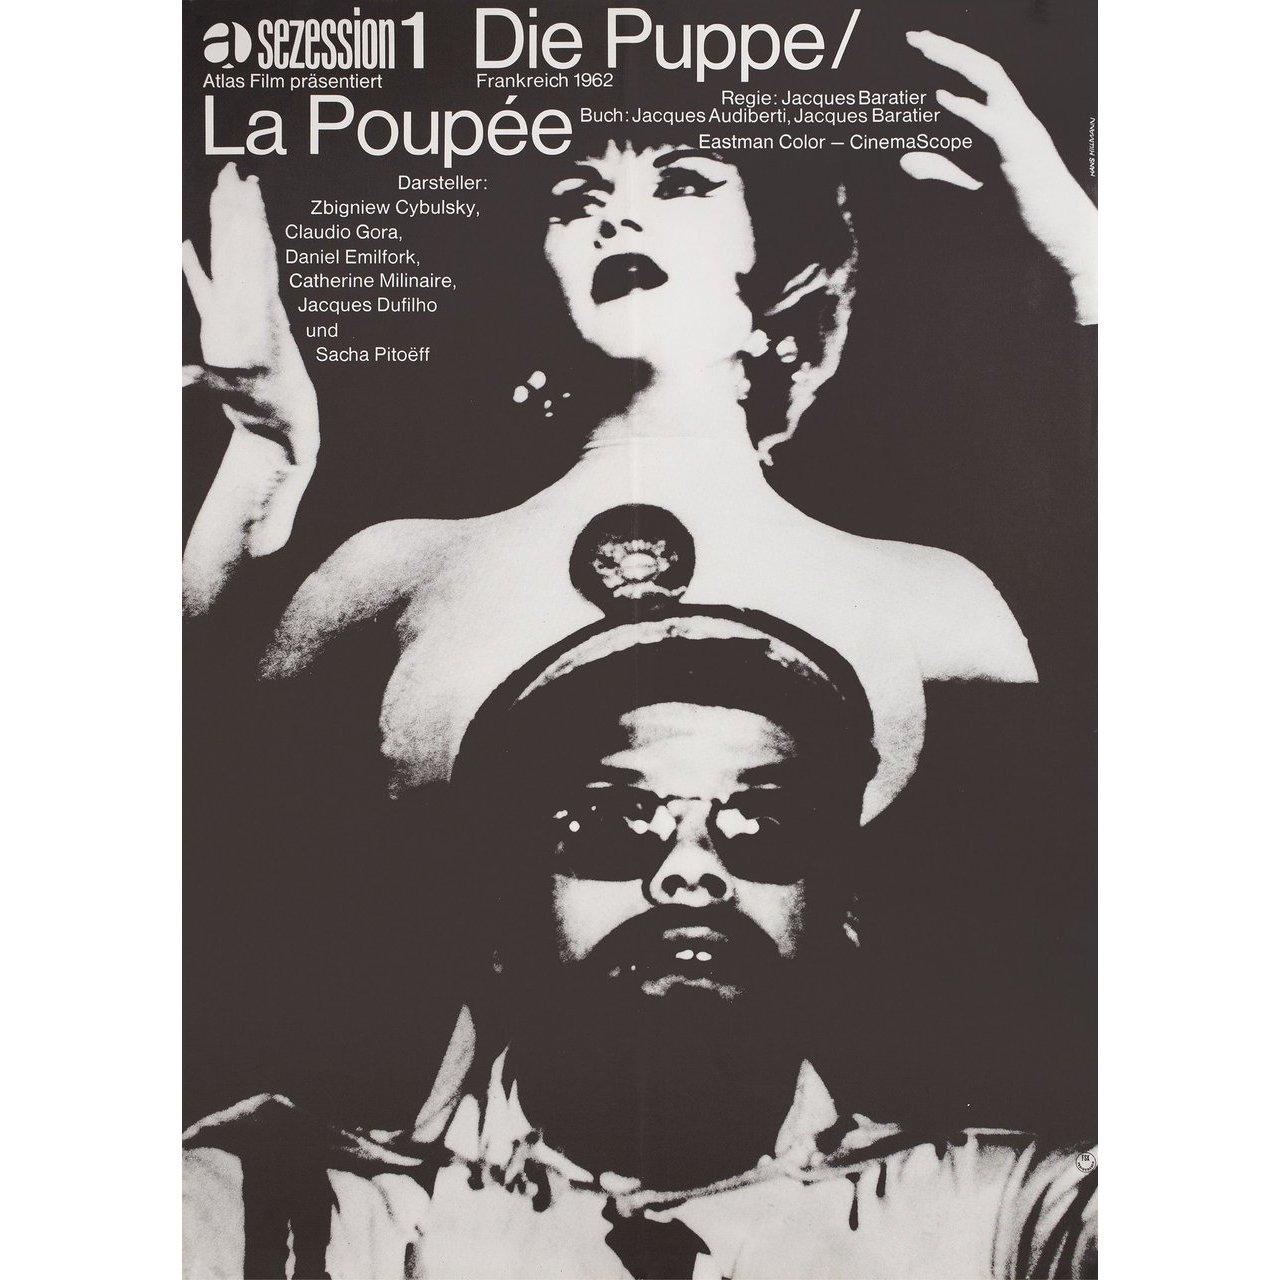 Original 1963 German A1 poster by Hans Hillmann for the first German theatrical release of the film La poupee directed by Jacques Baratier with Zbigniew Cybulski / Sonne Teal / Claudio Gora / Catherine Milinaire. Very Good-Fine condition, rolled.